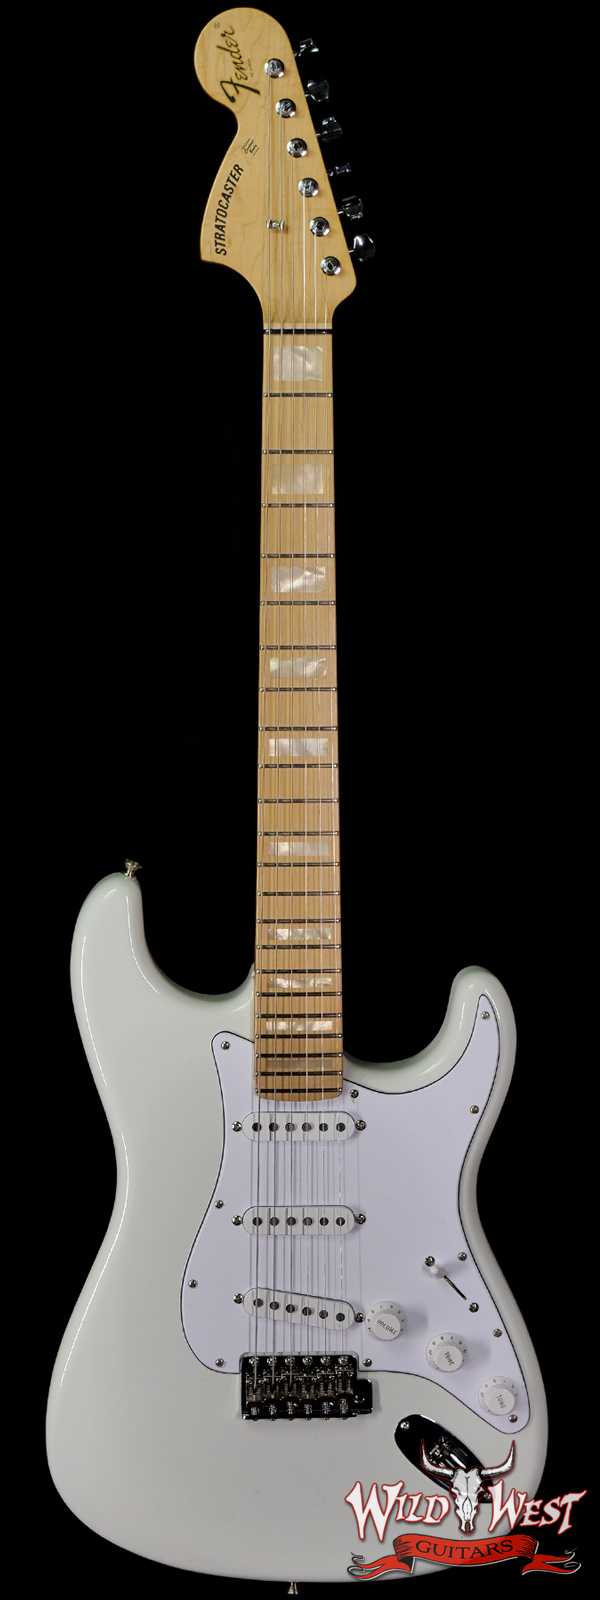 Fender Custom Shop 1969 Stratocaster Maple Board Block Inlay Reverse Headstock Hand-Wound Pickups NOS Olympic White (Blemish)